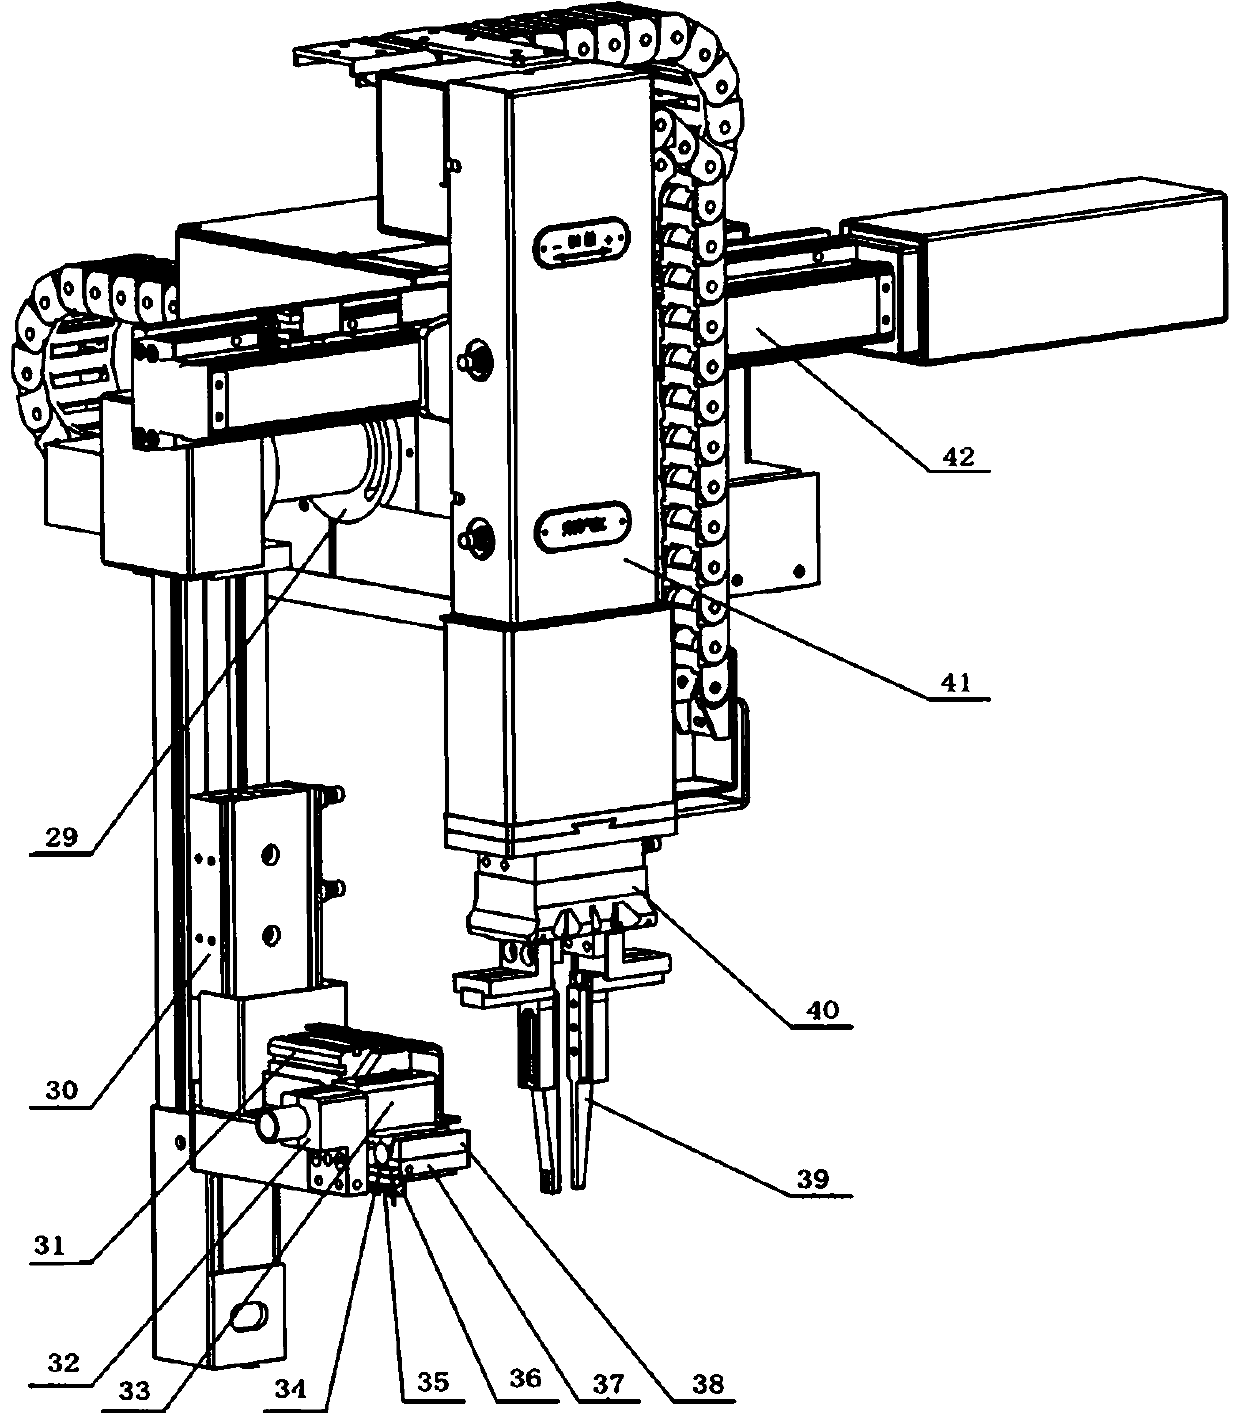 Automatic feeding and blanking system for centerless grinding machine screws